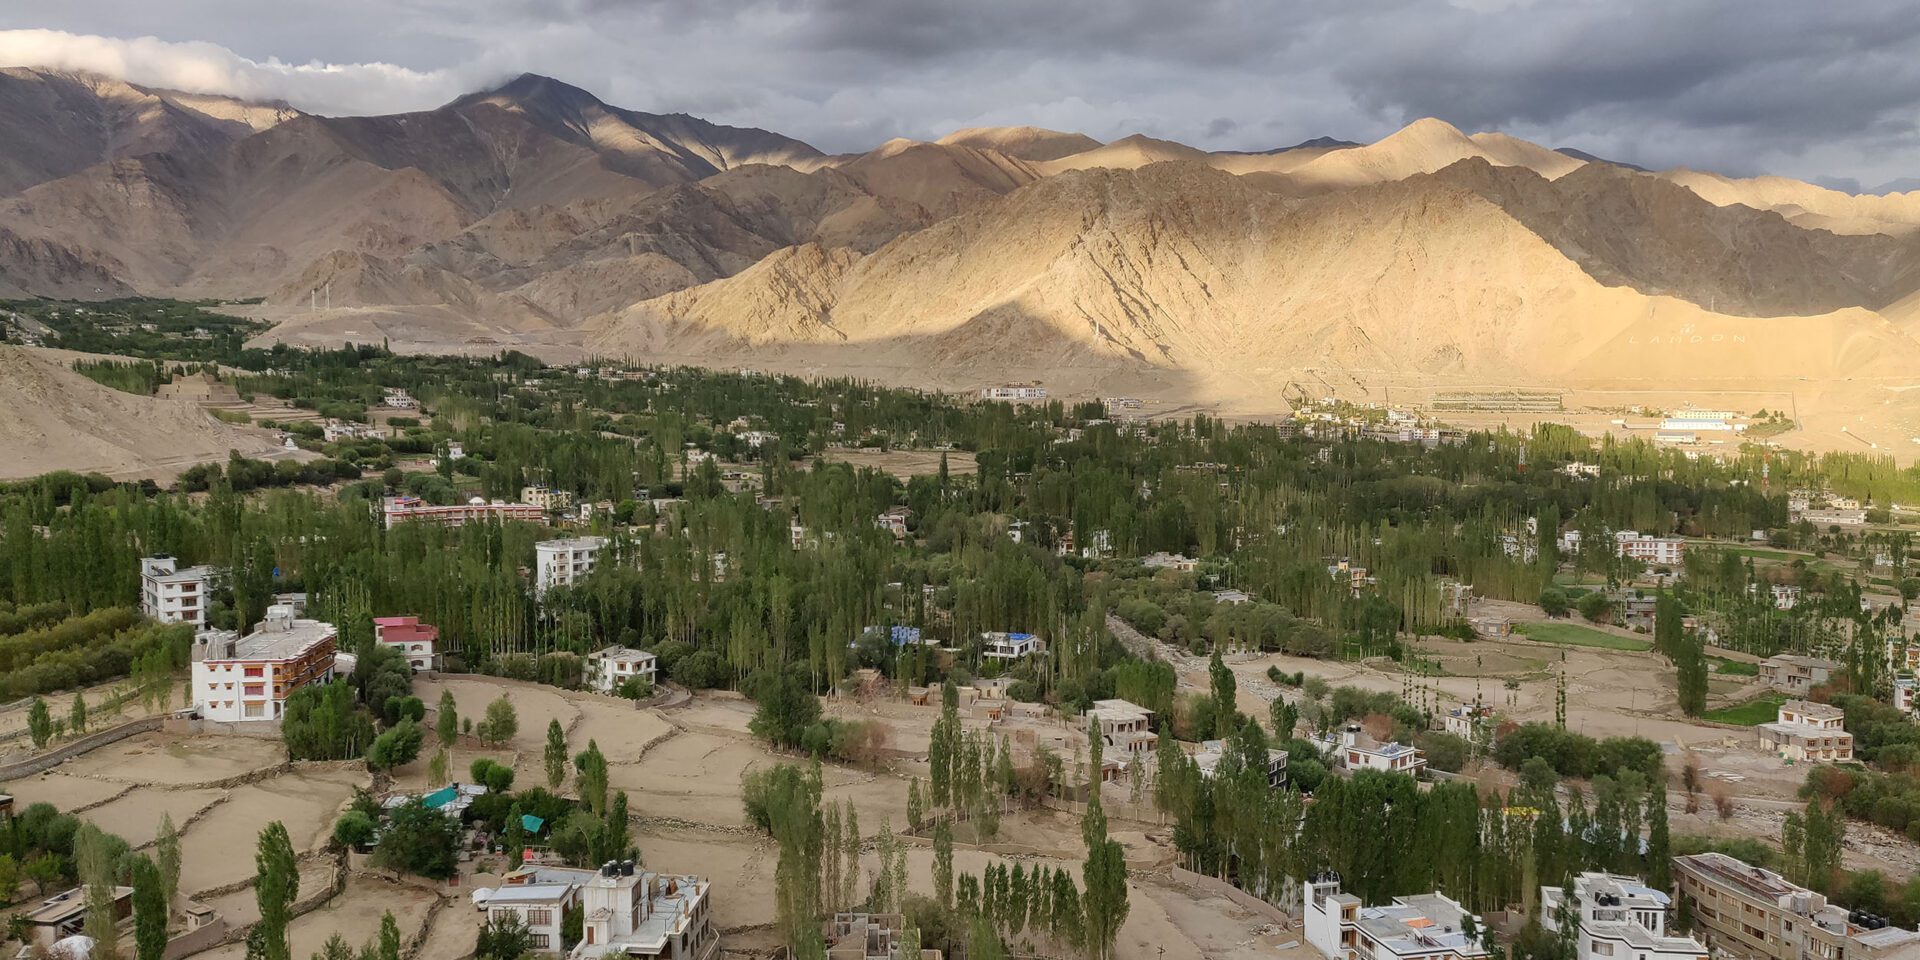 15 superb facts about Nubra Valley in Ladakh ~ The Land of Wanderlust